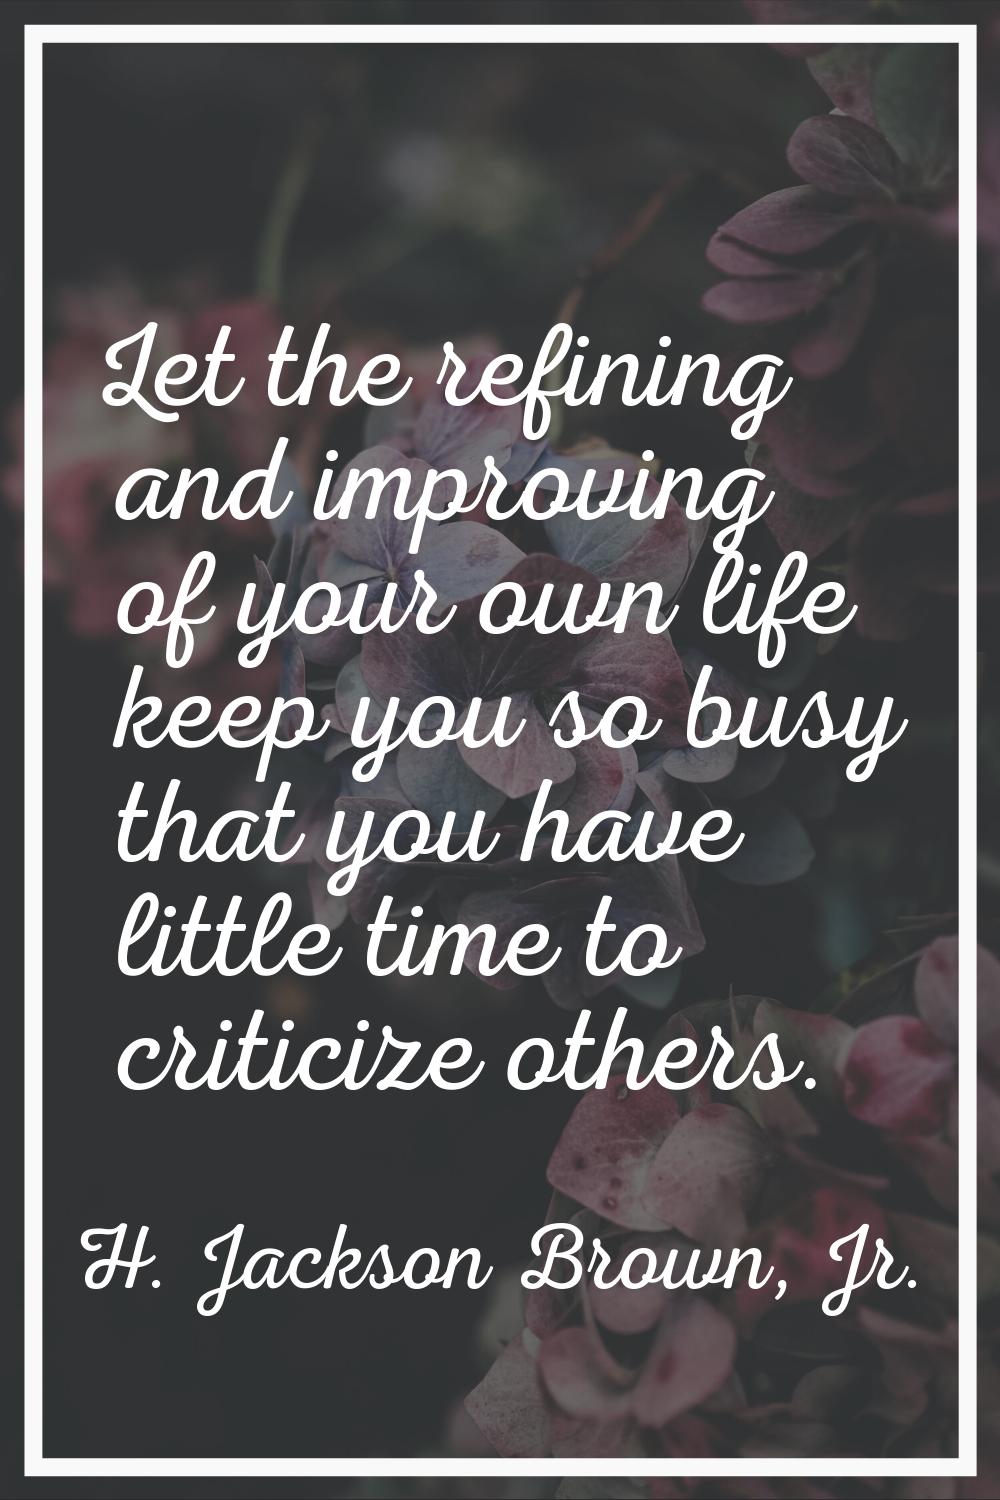 Let the refining and improving of your own life keep you so busy that you have little time to criti